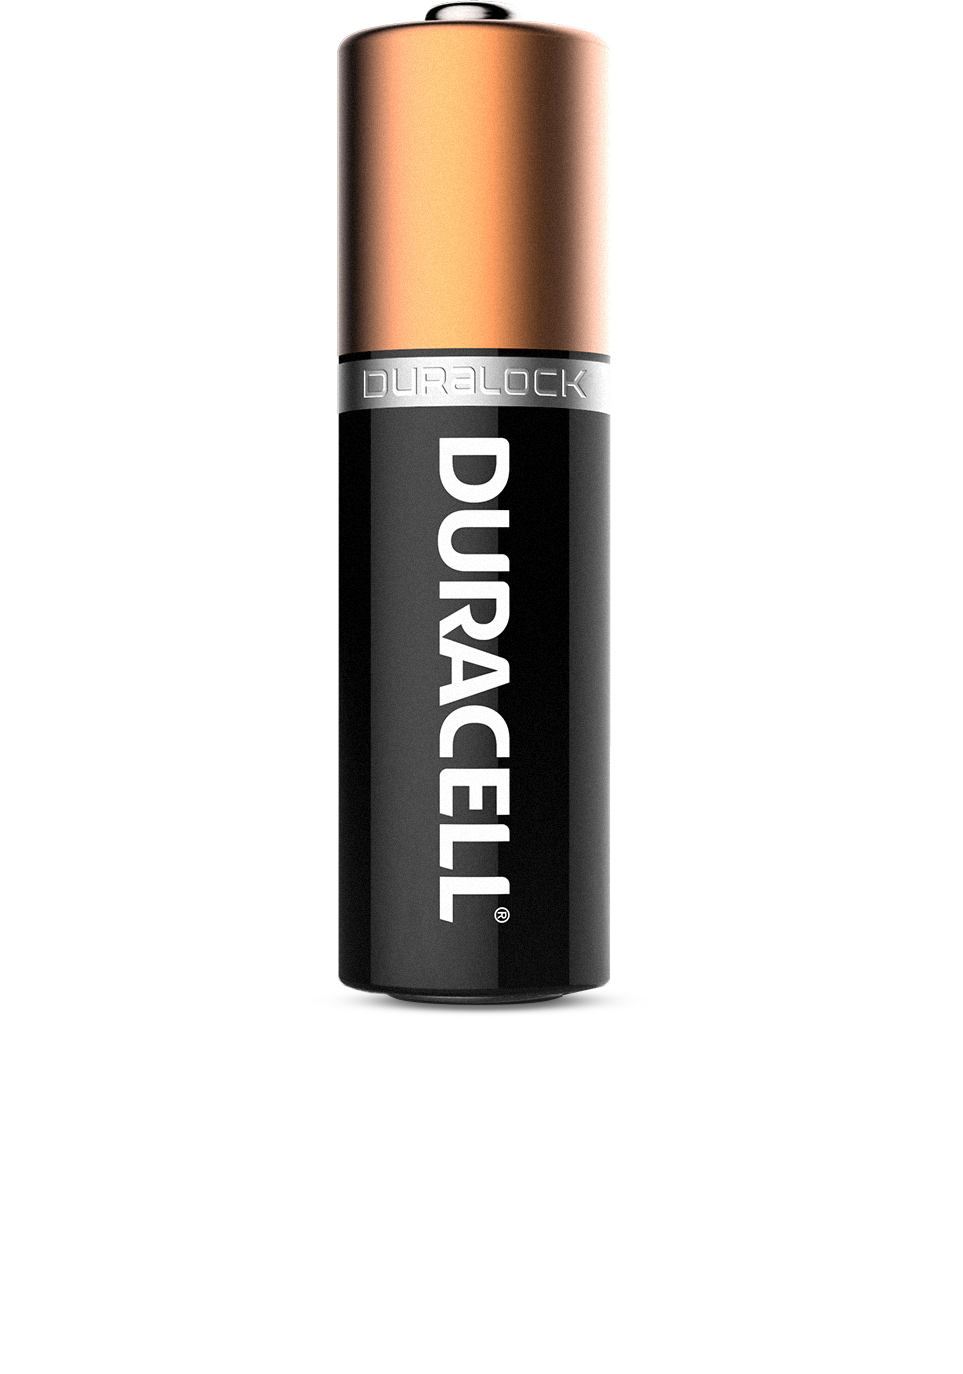 duracell battery png